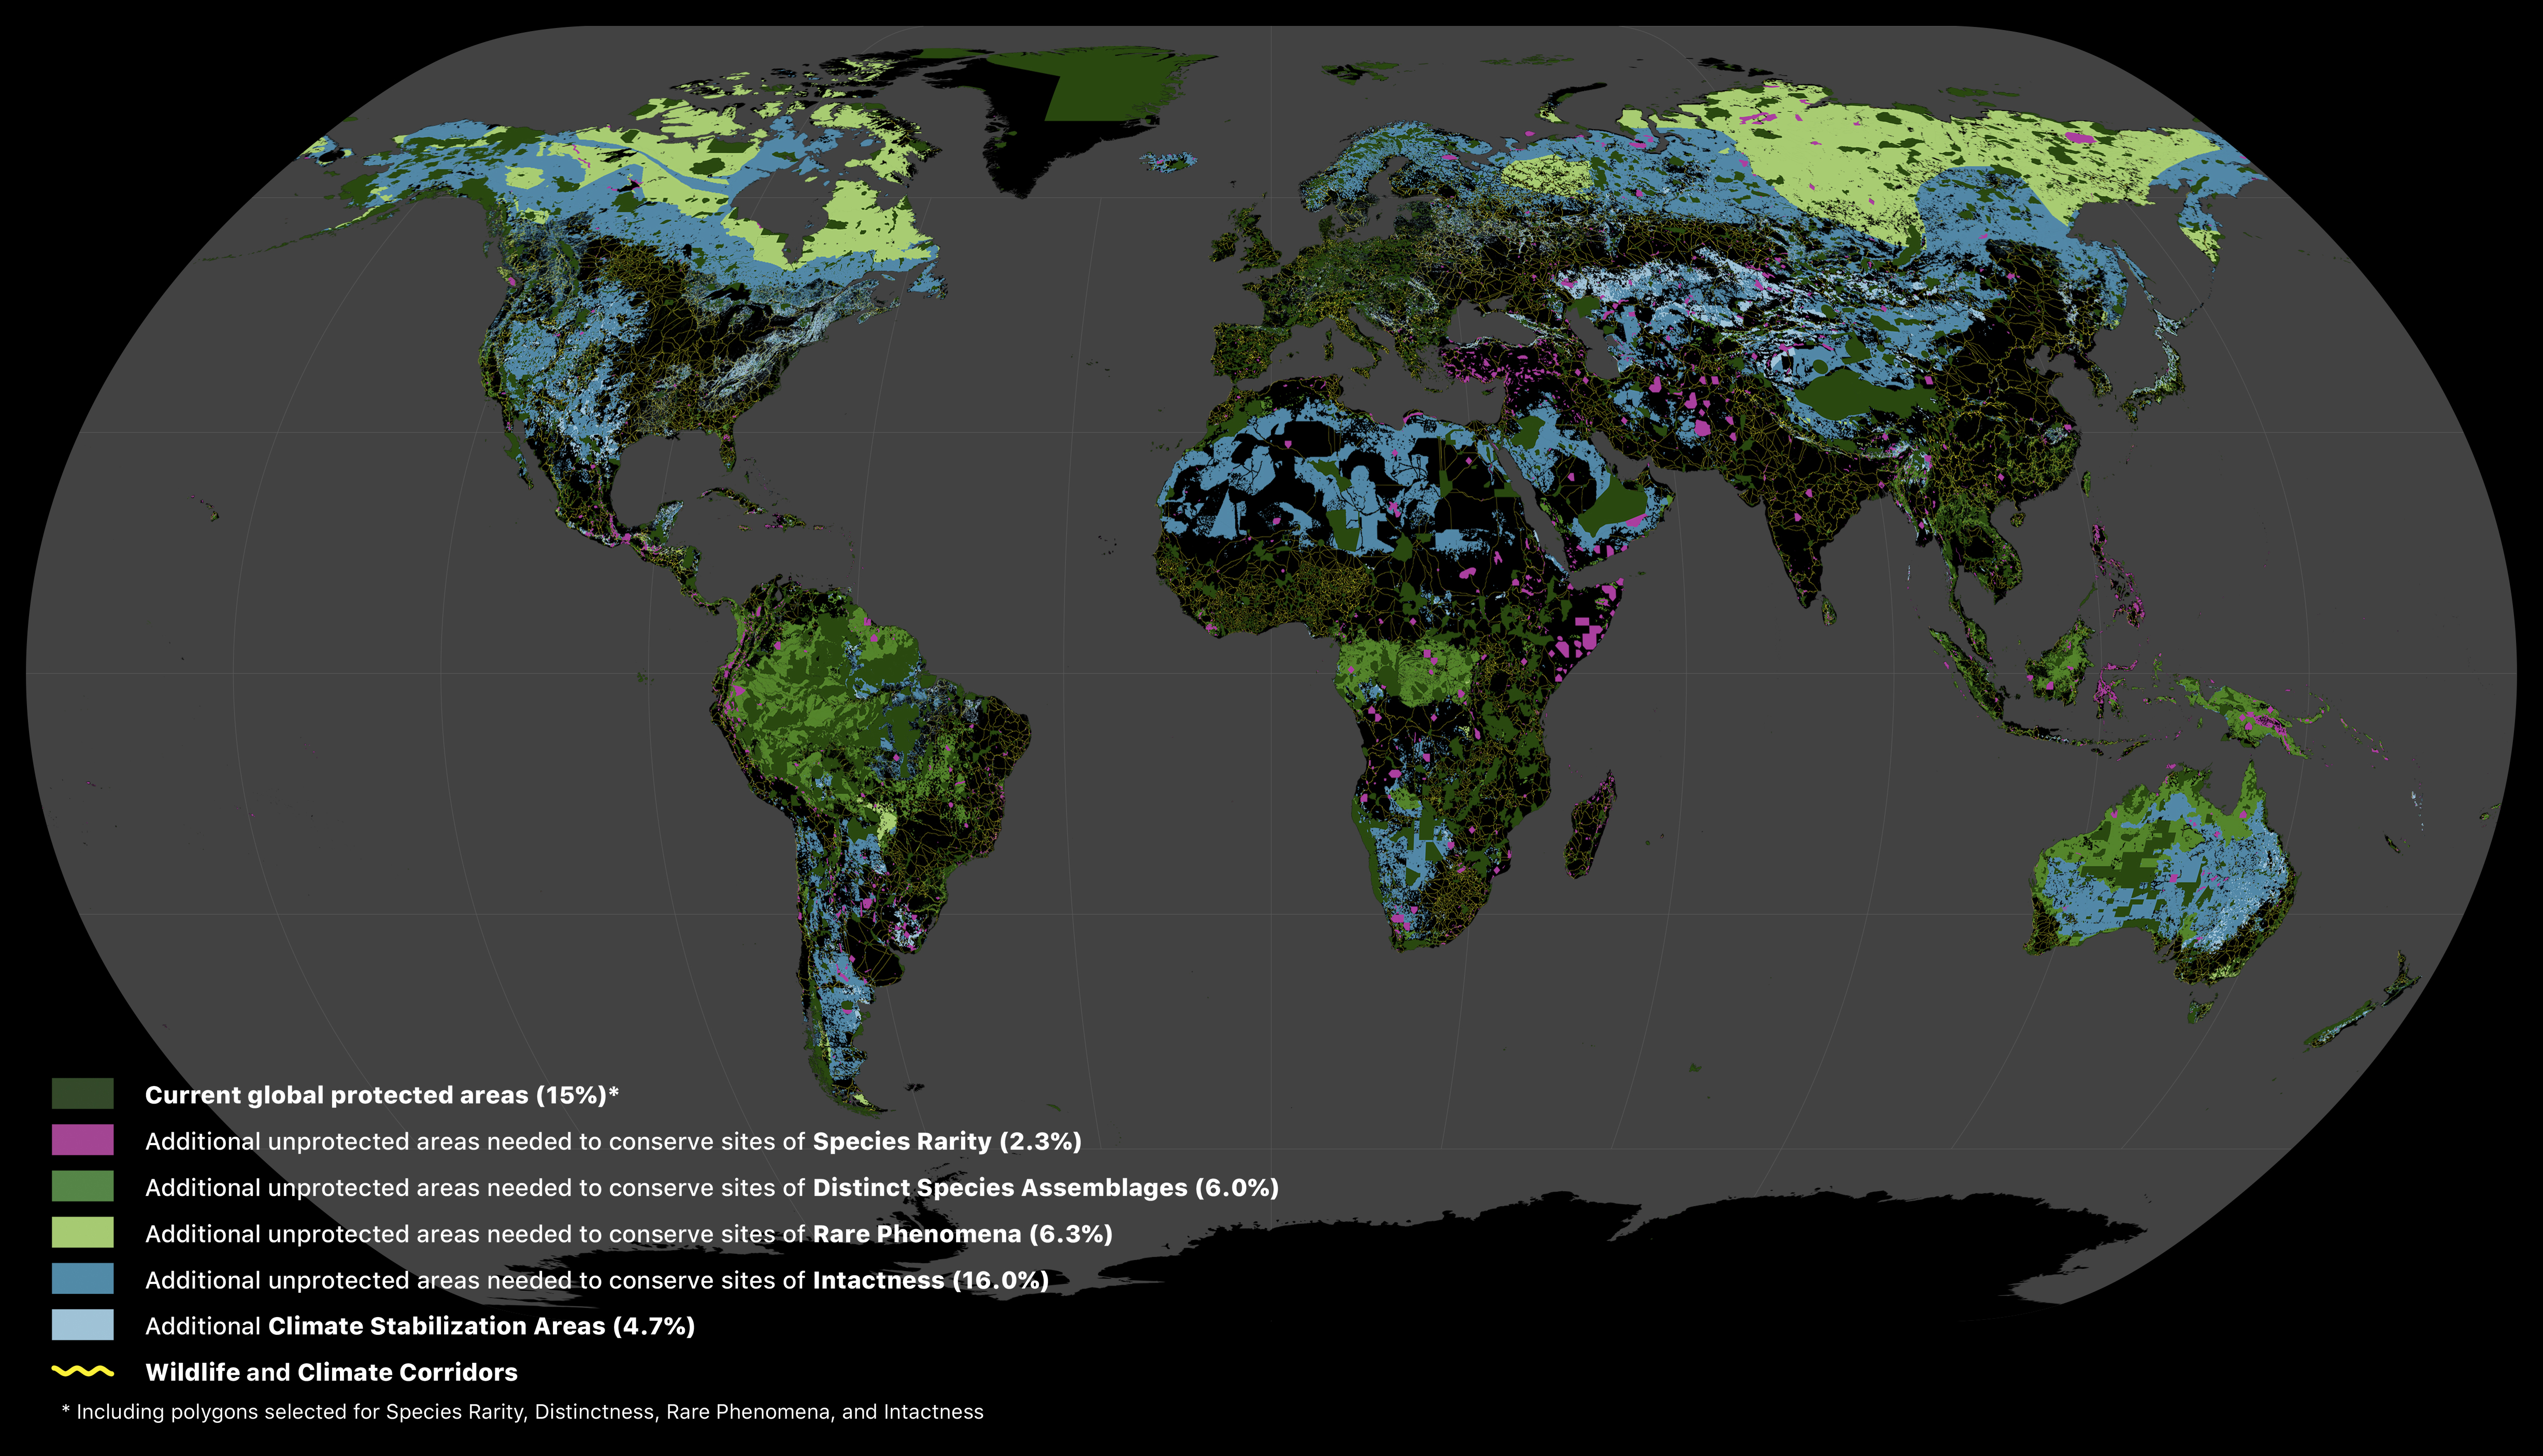 Areas of the terrestrial realm where increased conservation action is needed to protect biodiversity and store carbon.